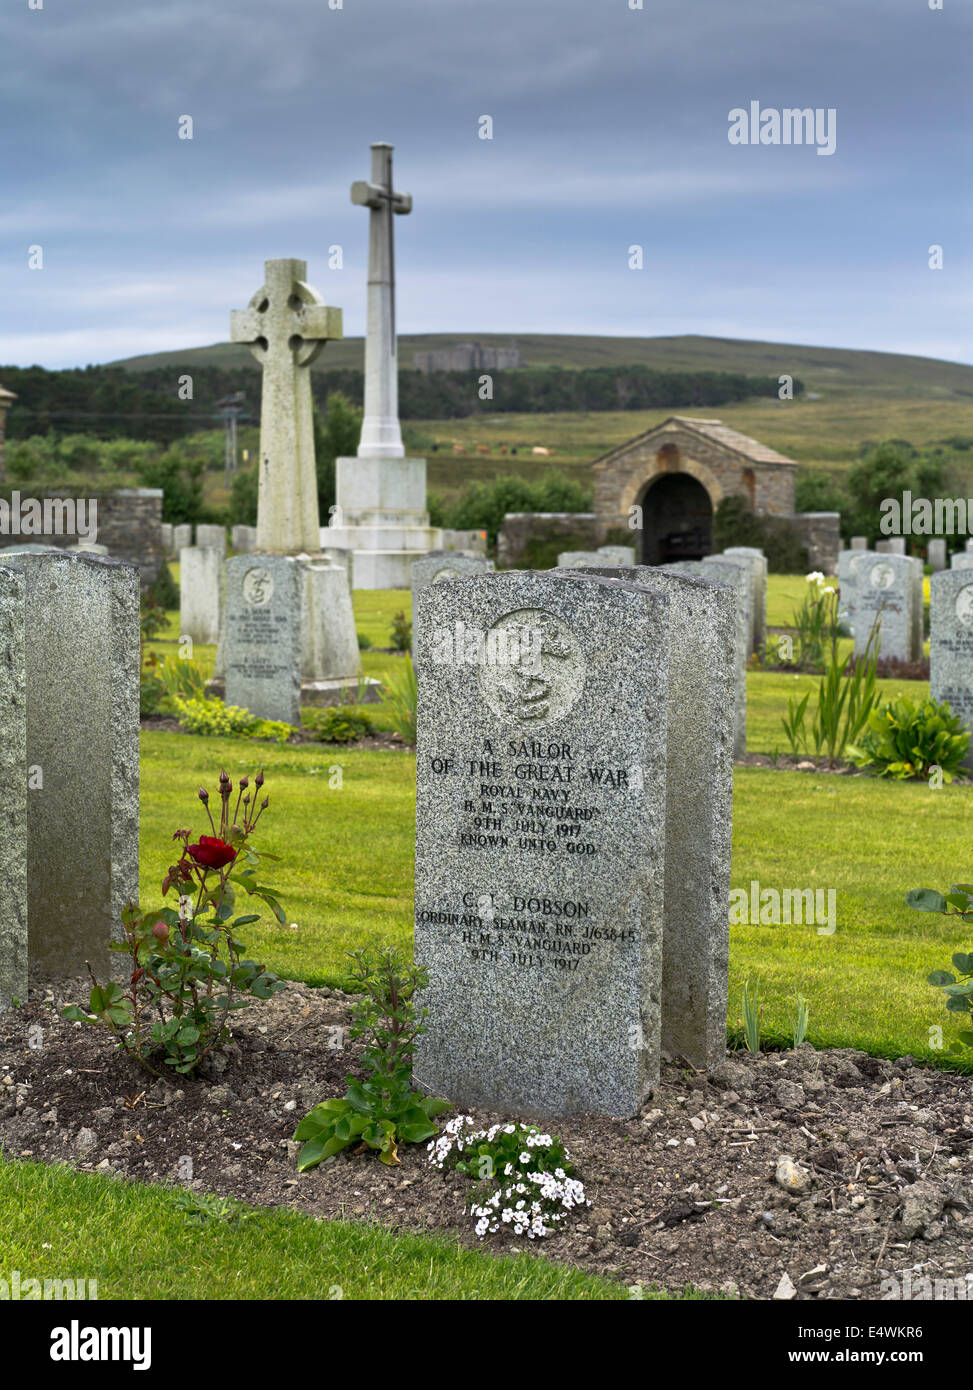 dh Lyness Naval Cemetery HOY ORKNEY World war one cemetery grave stone military cemetery navy Stock Photo